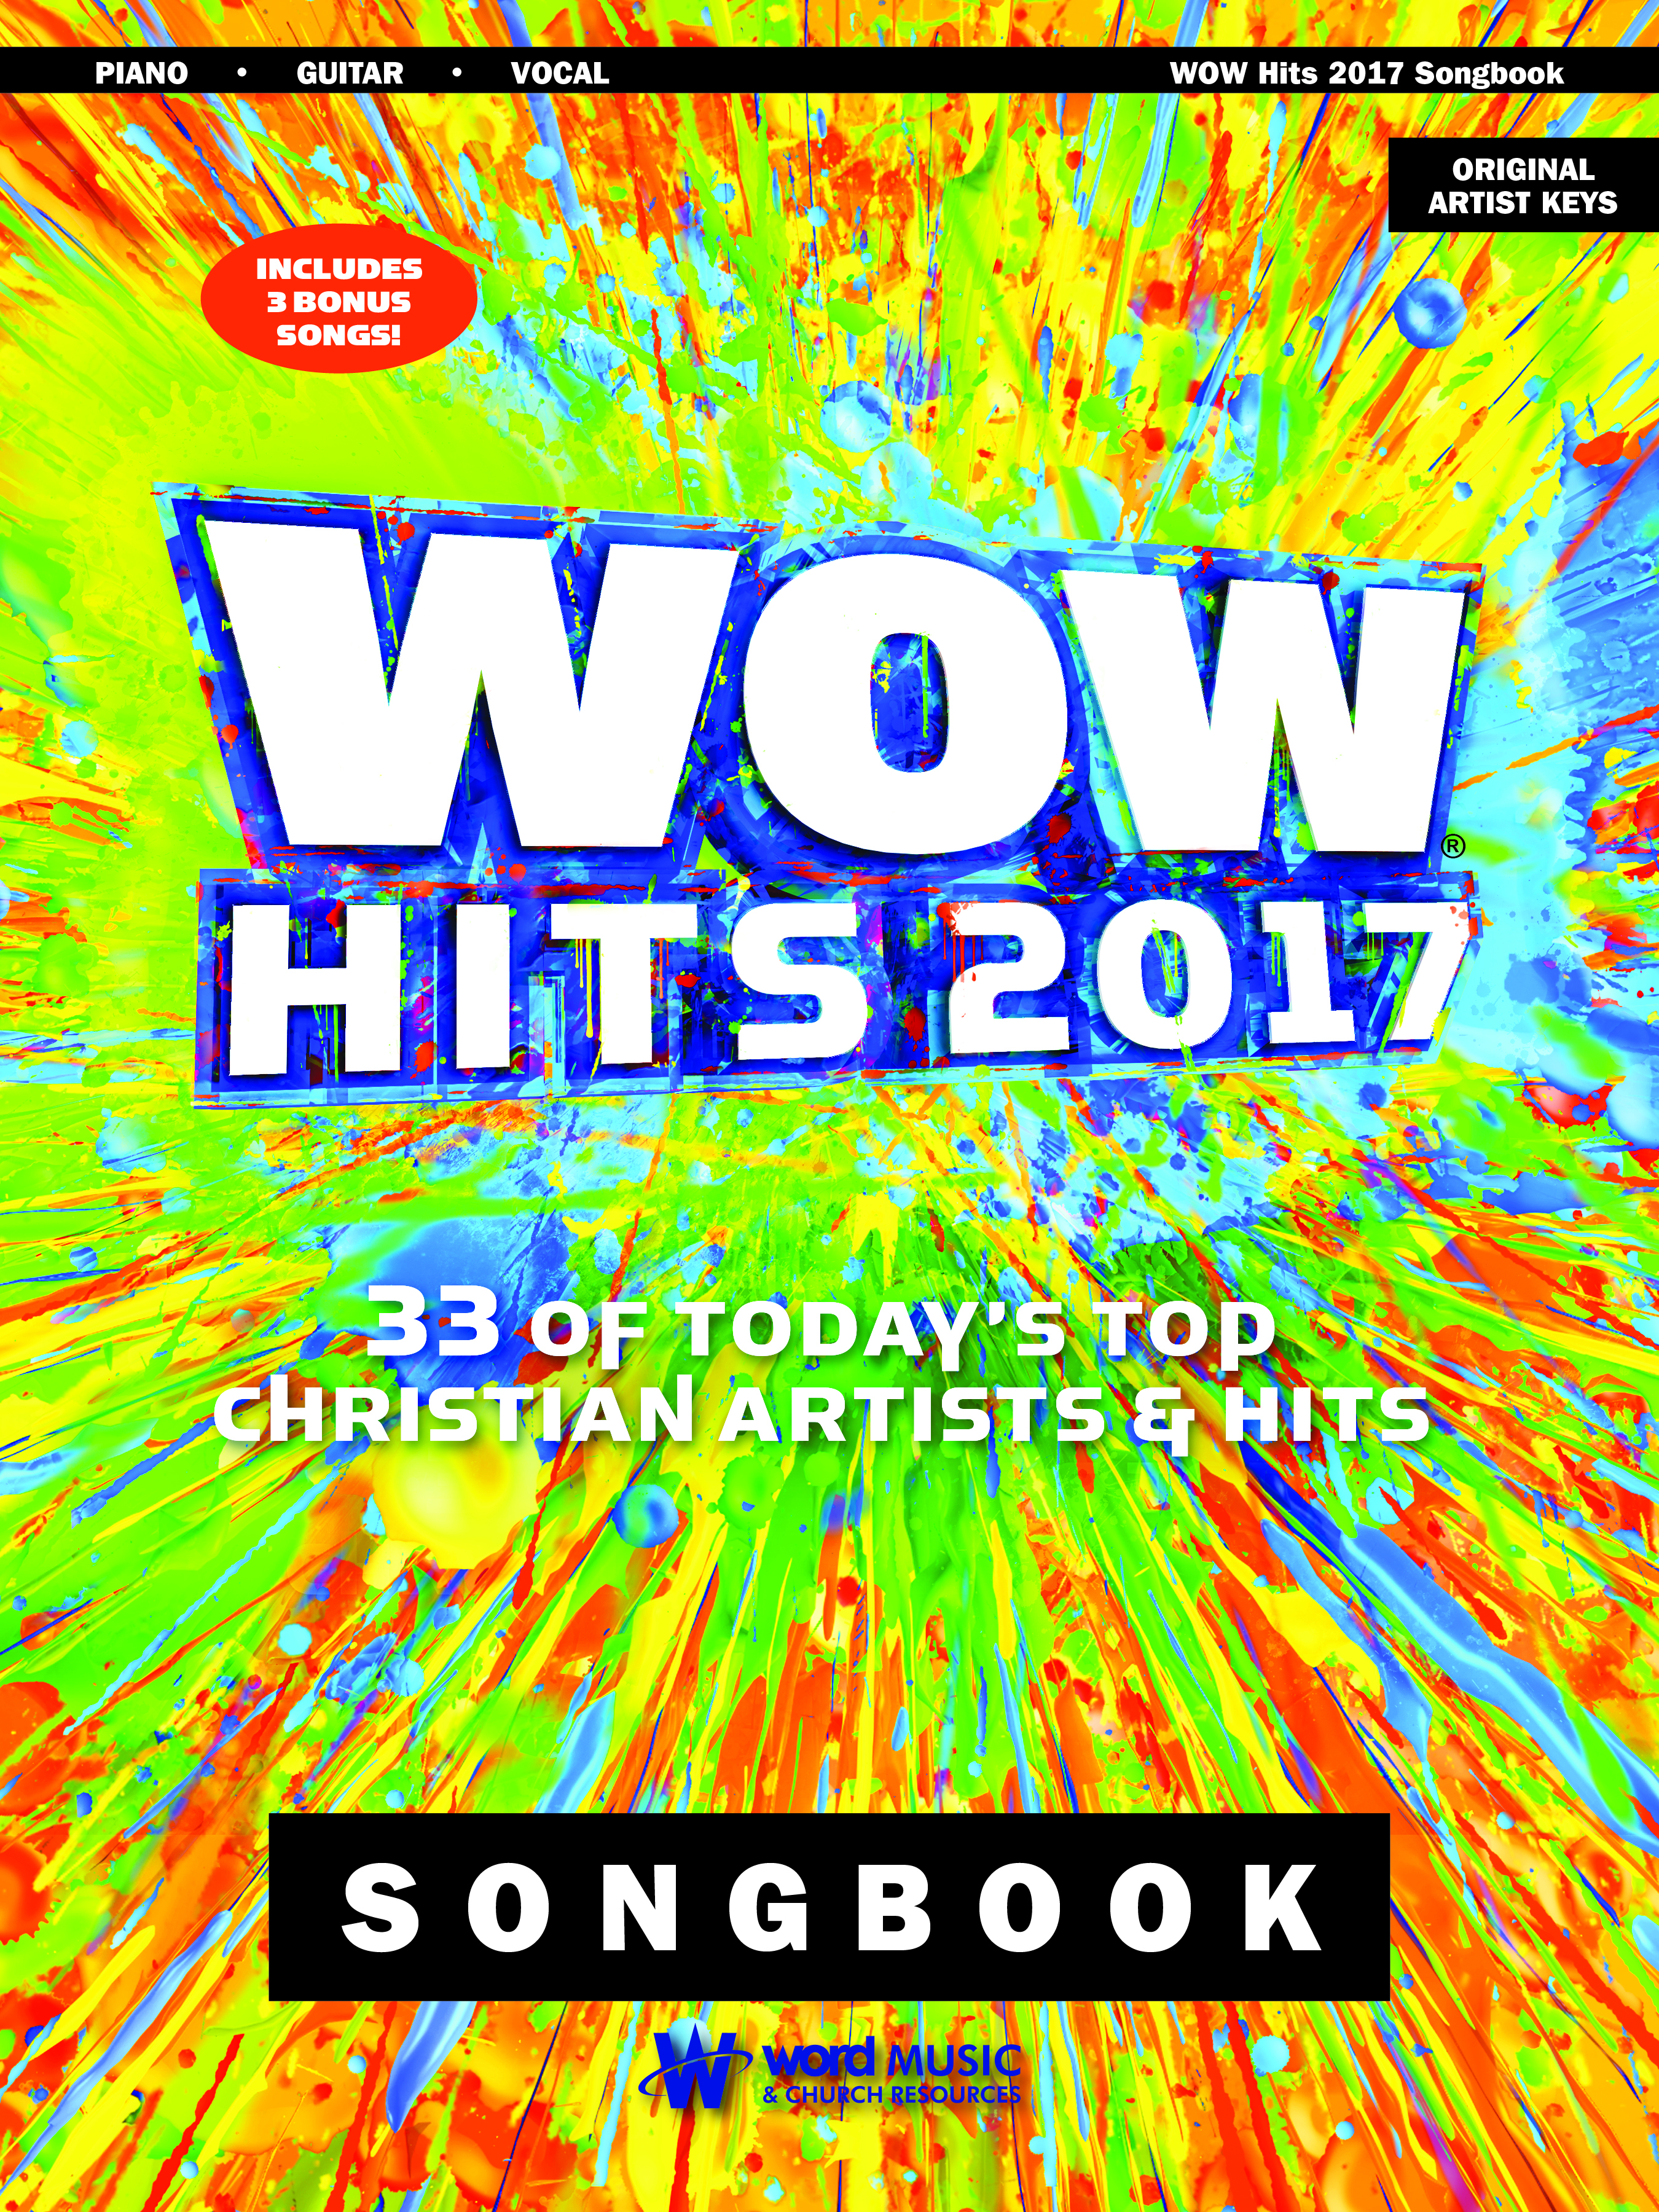 wow hits 2016 back cover